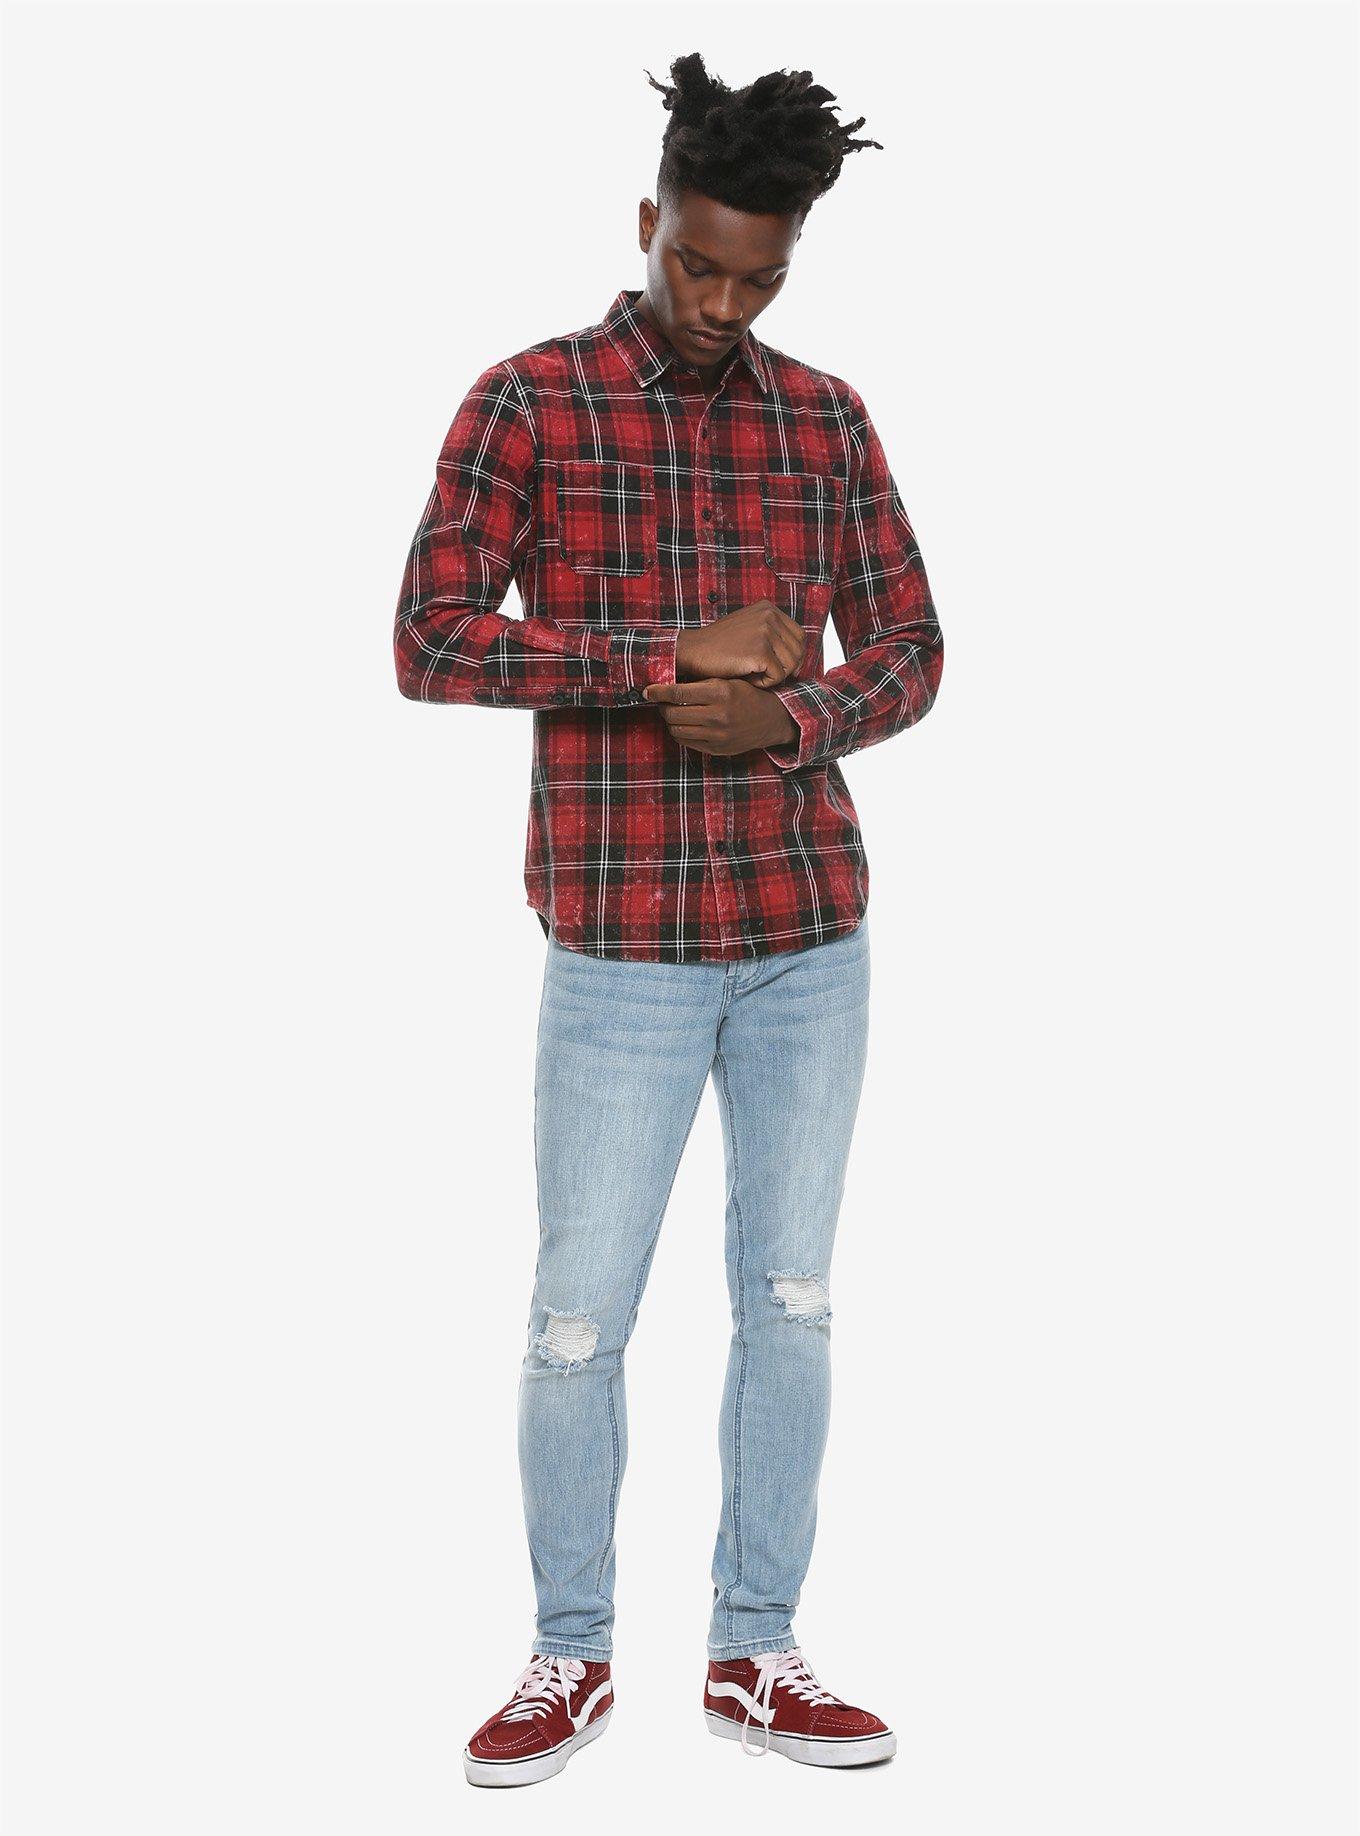 Distressed Red Plaid Woven Button-Up, BLACK, alternate